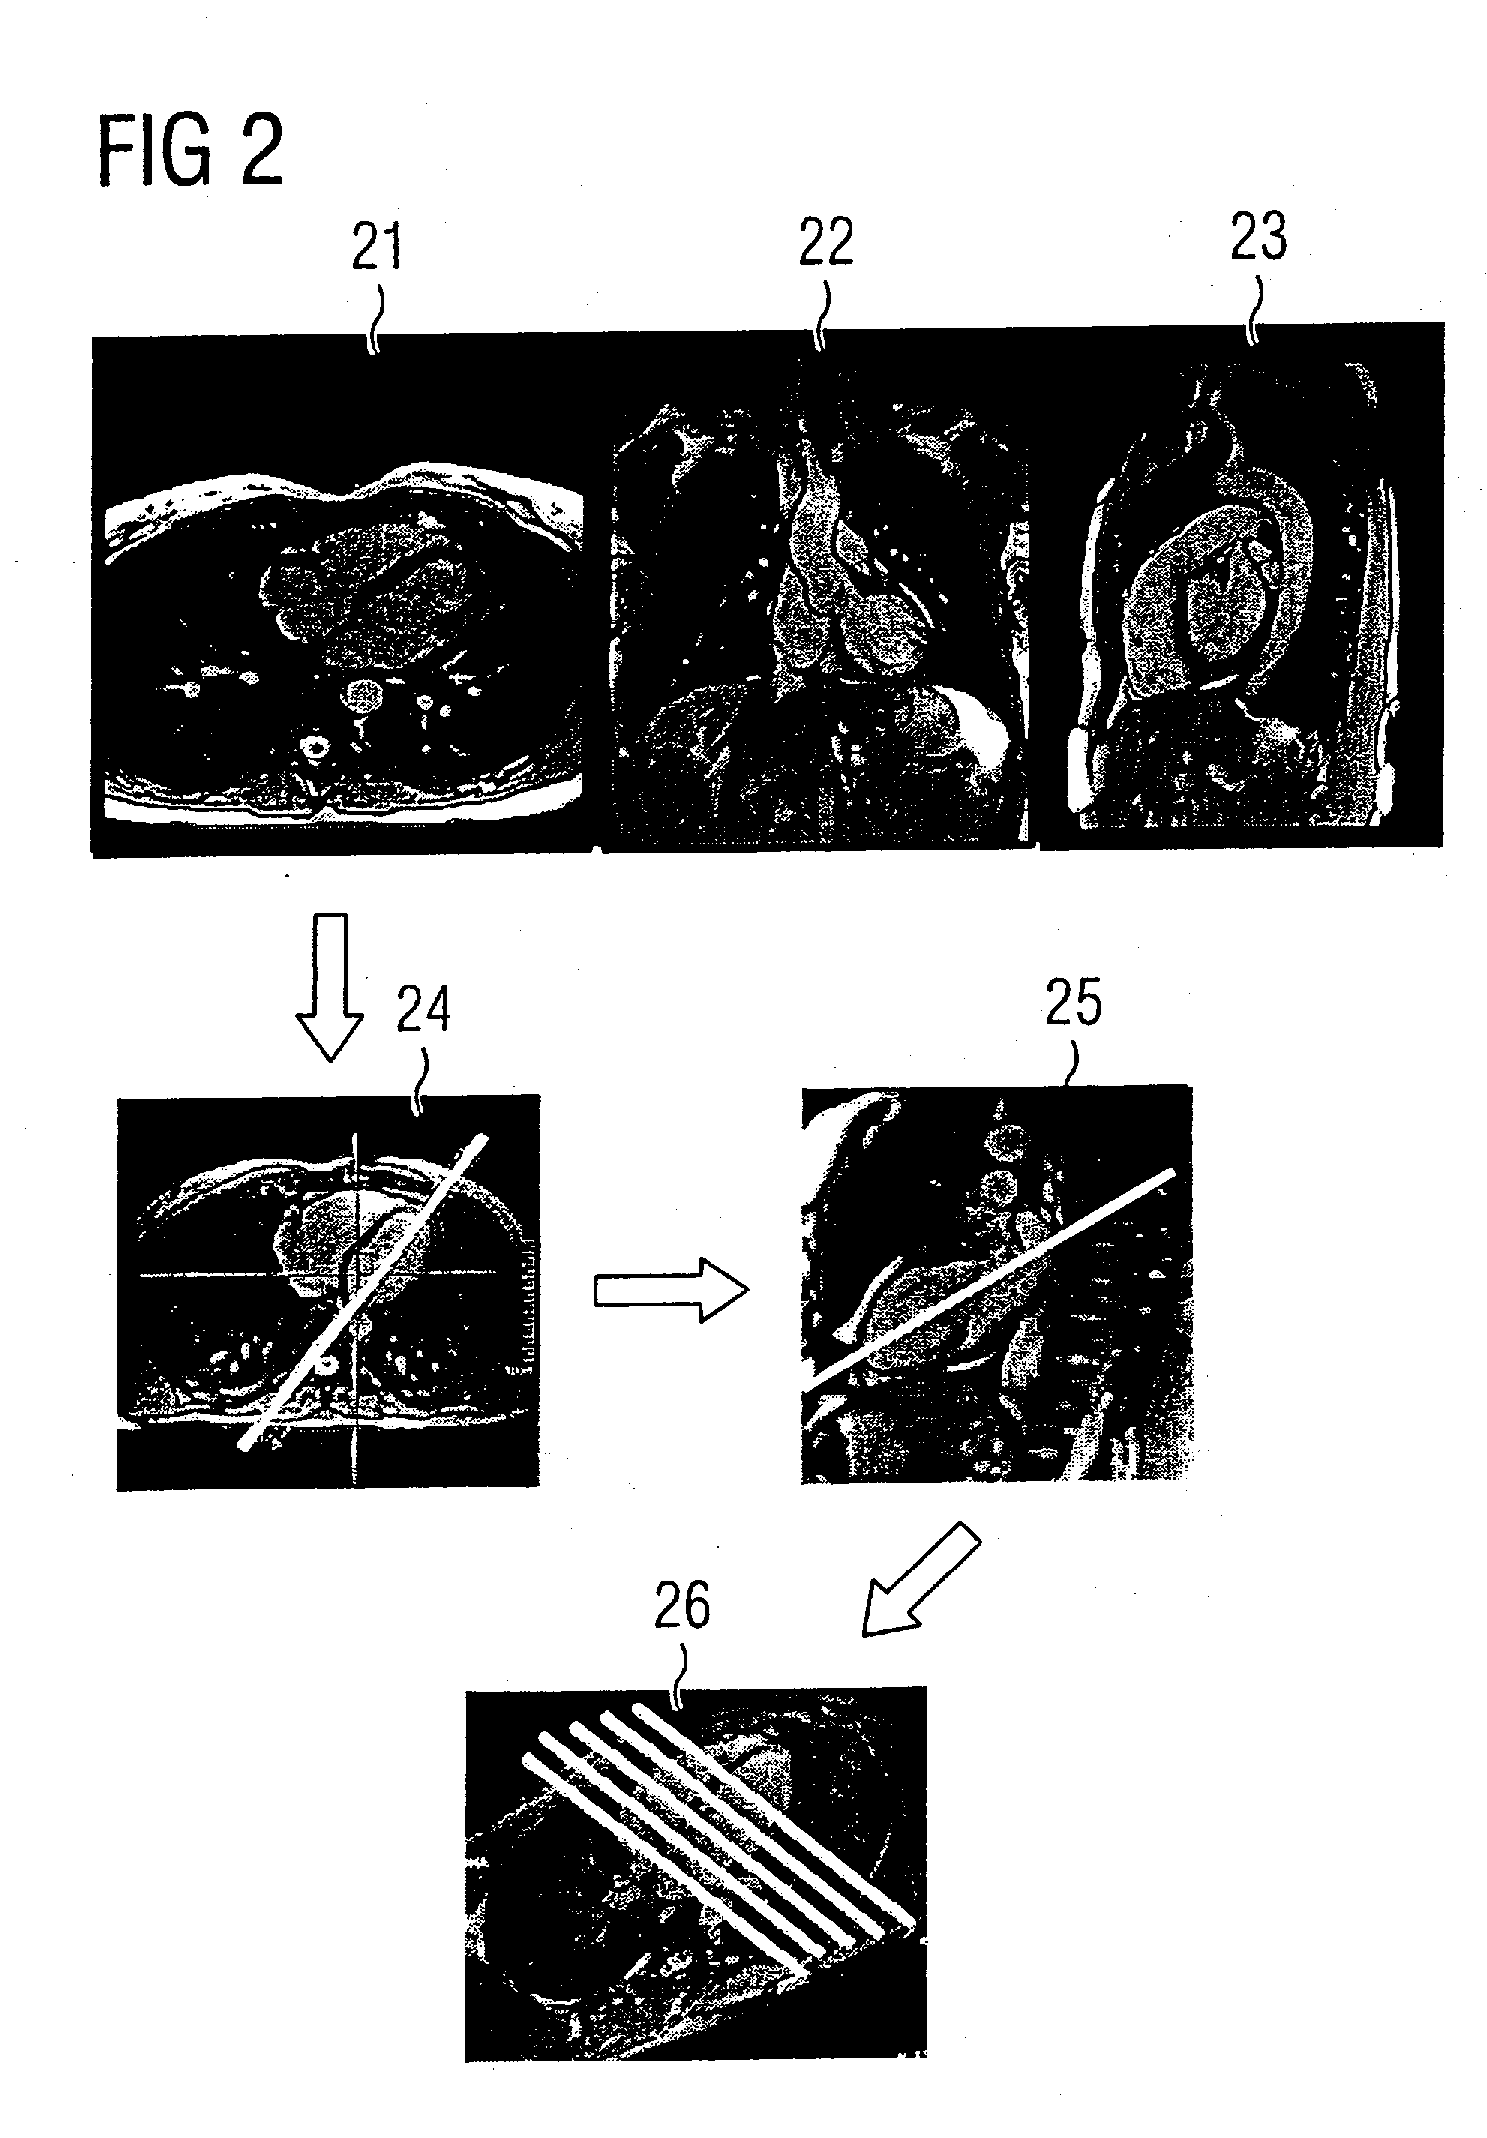 Magnetic resonance system and method for cardiac imaging